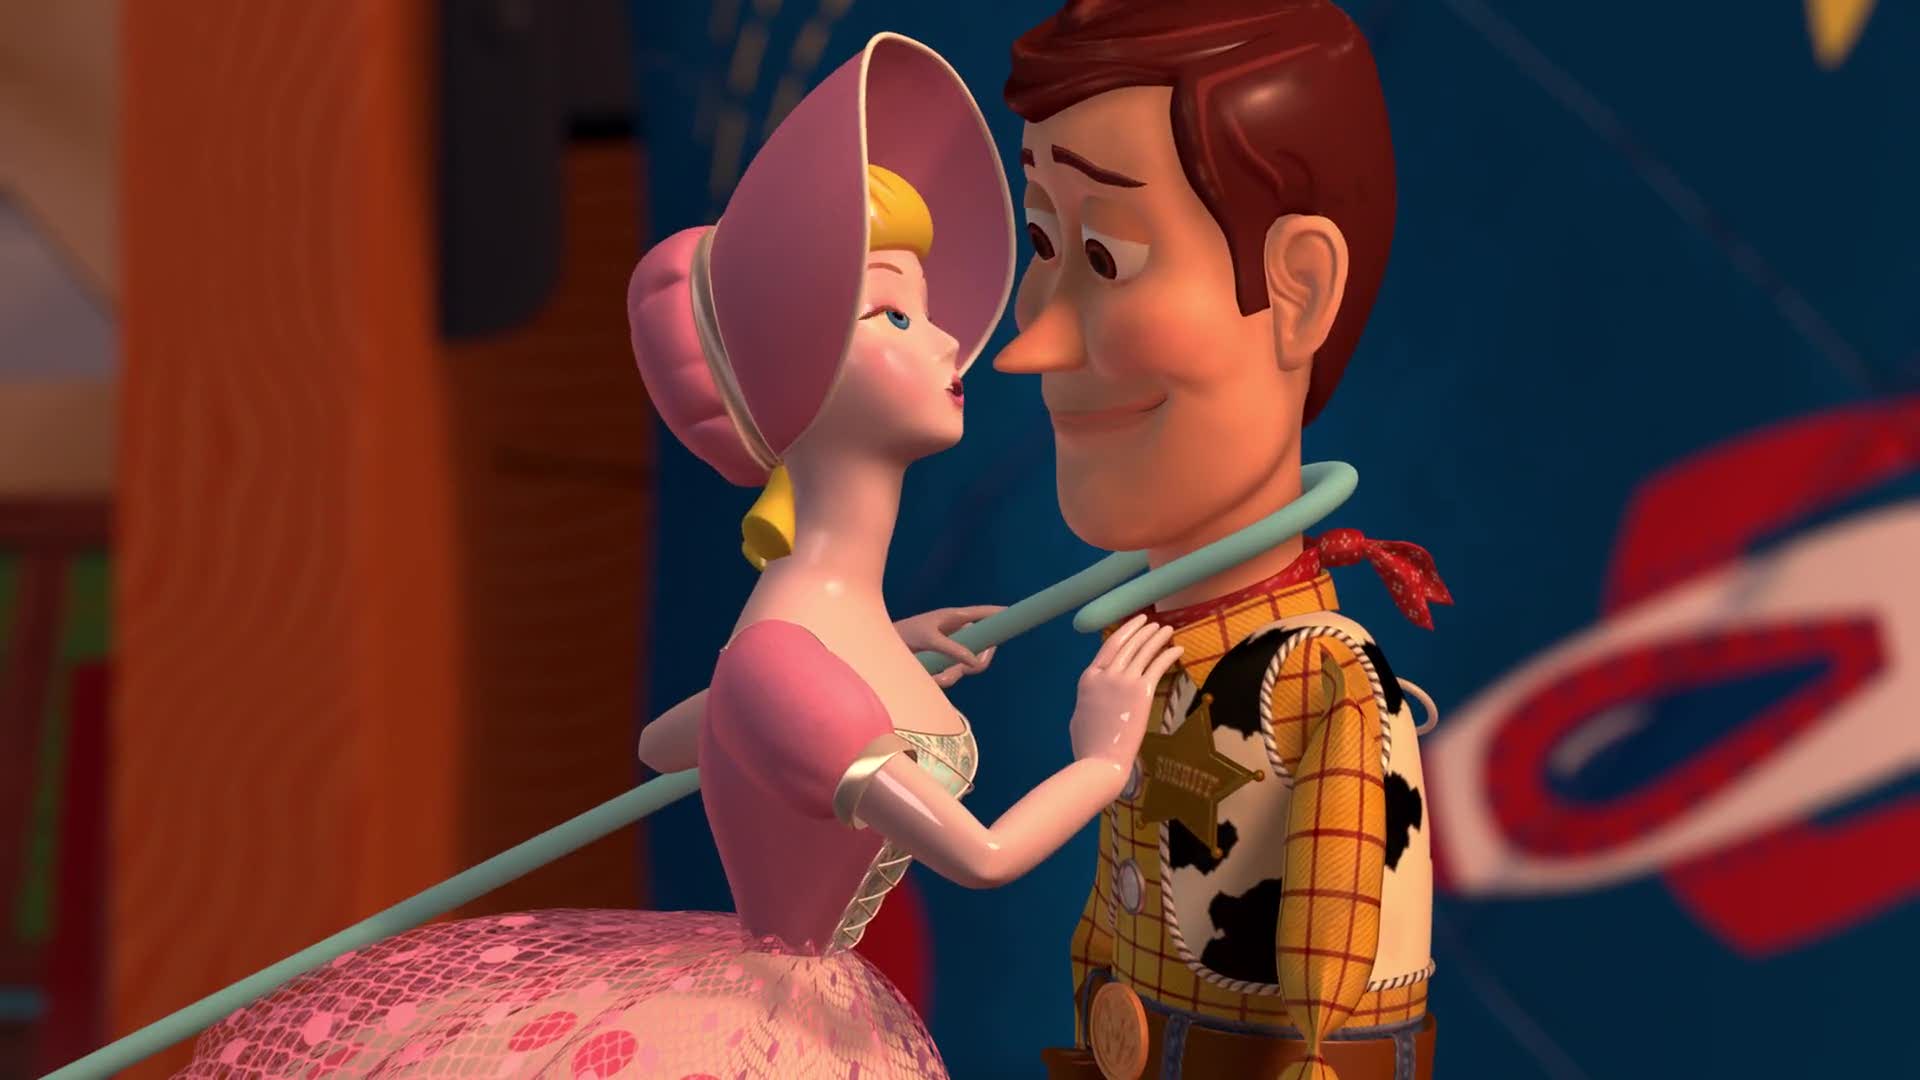 The Ending of 'Toy Story 3' Caught the Voice Actress for Bonnie by Surprise